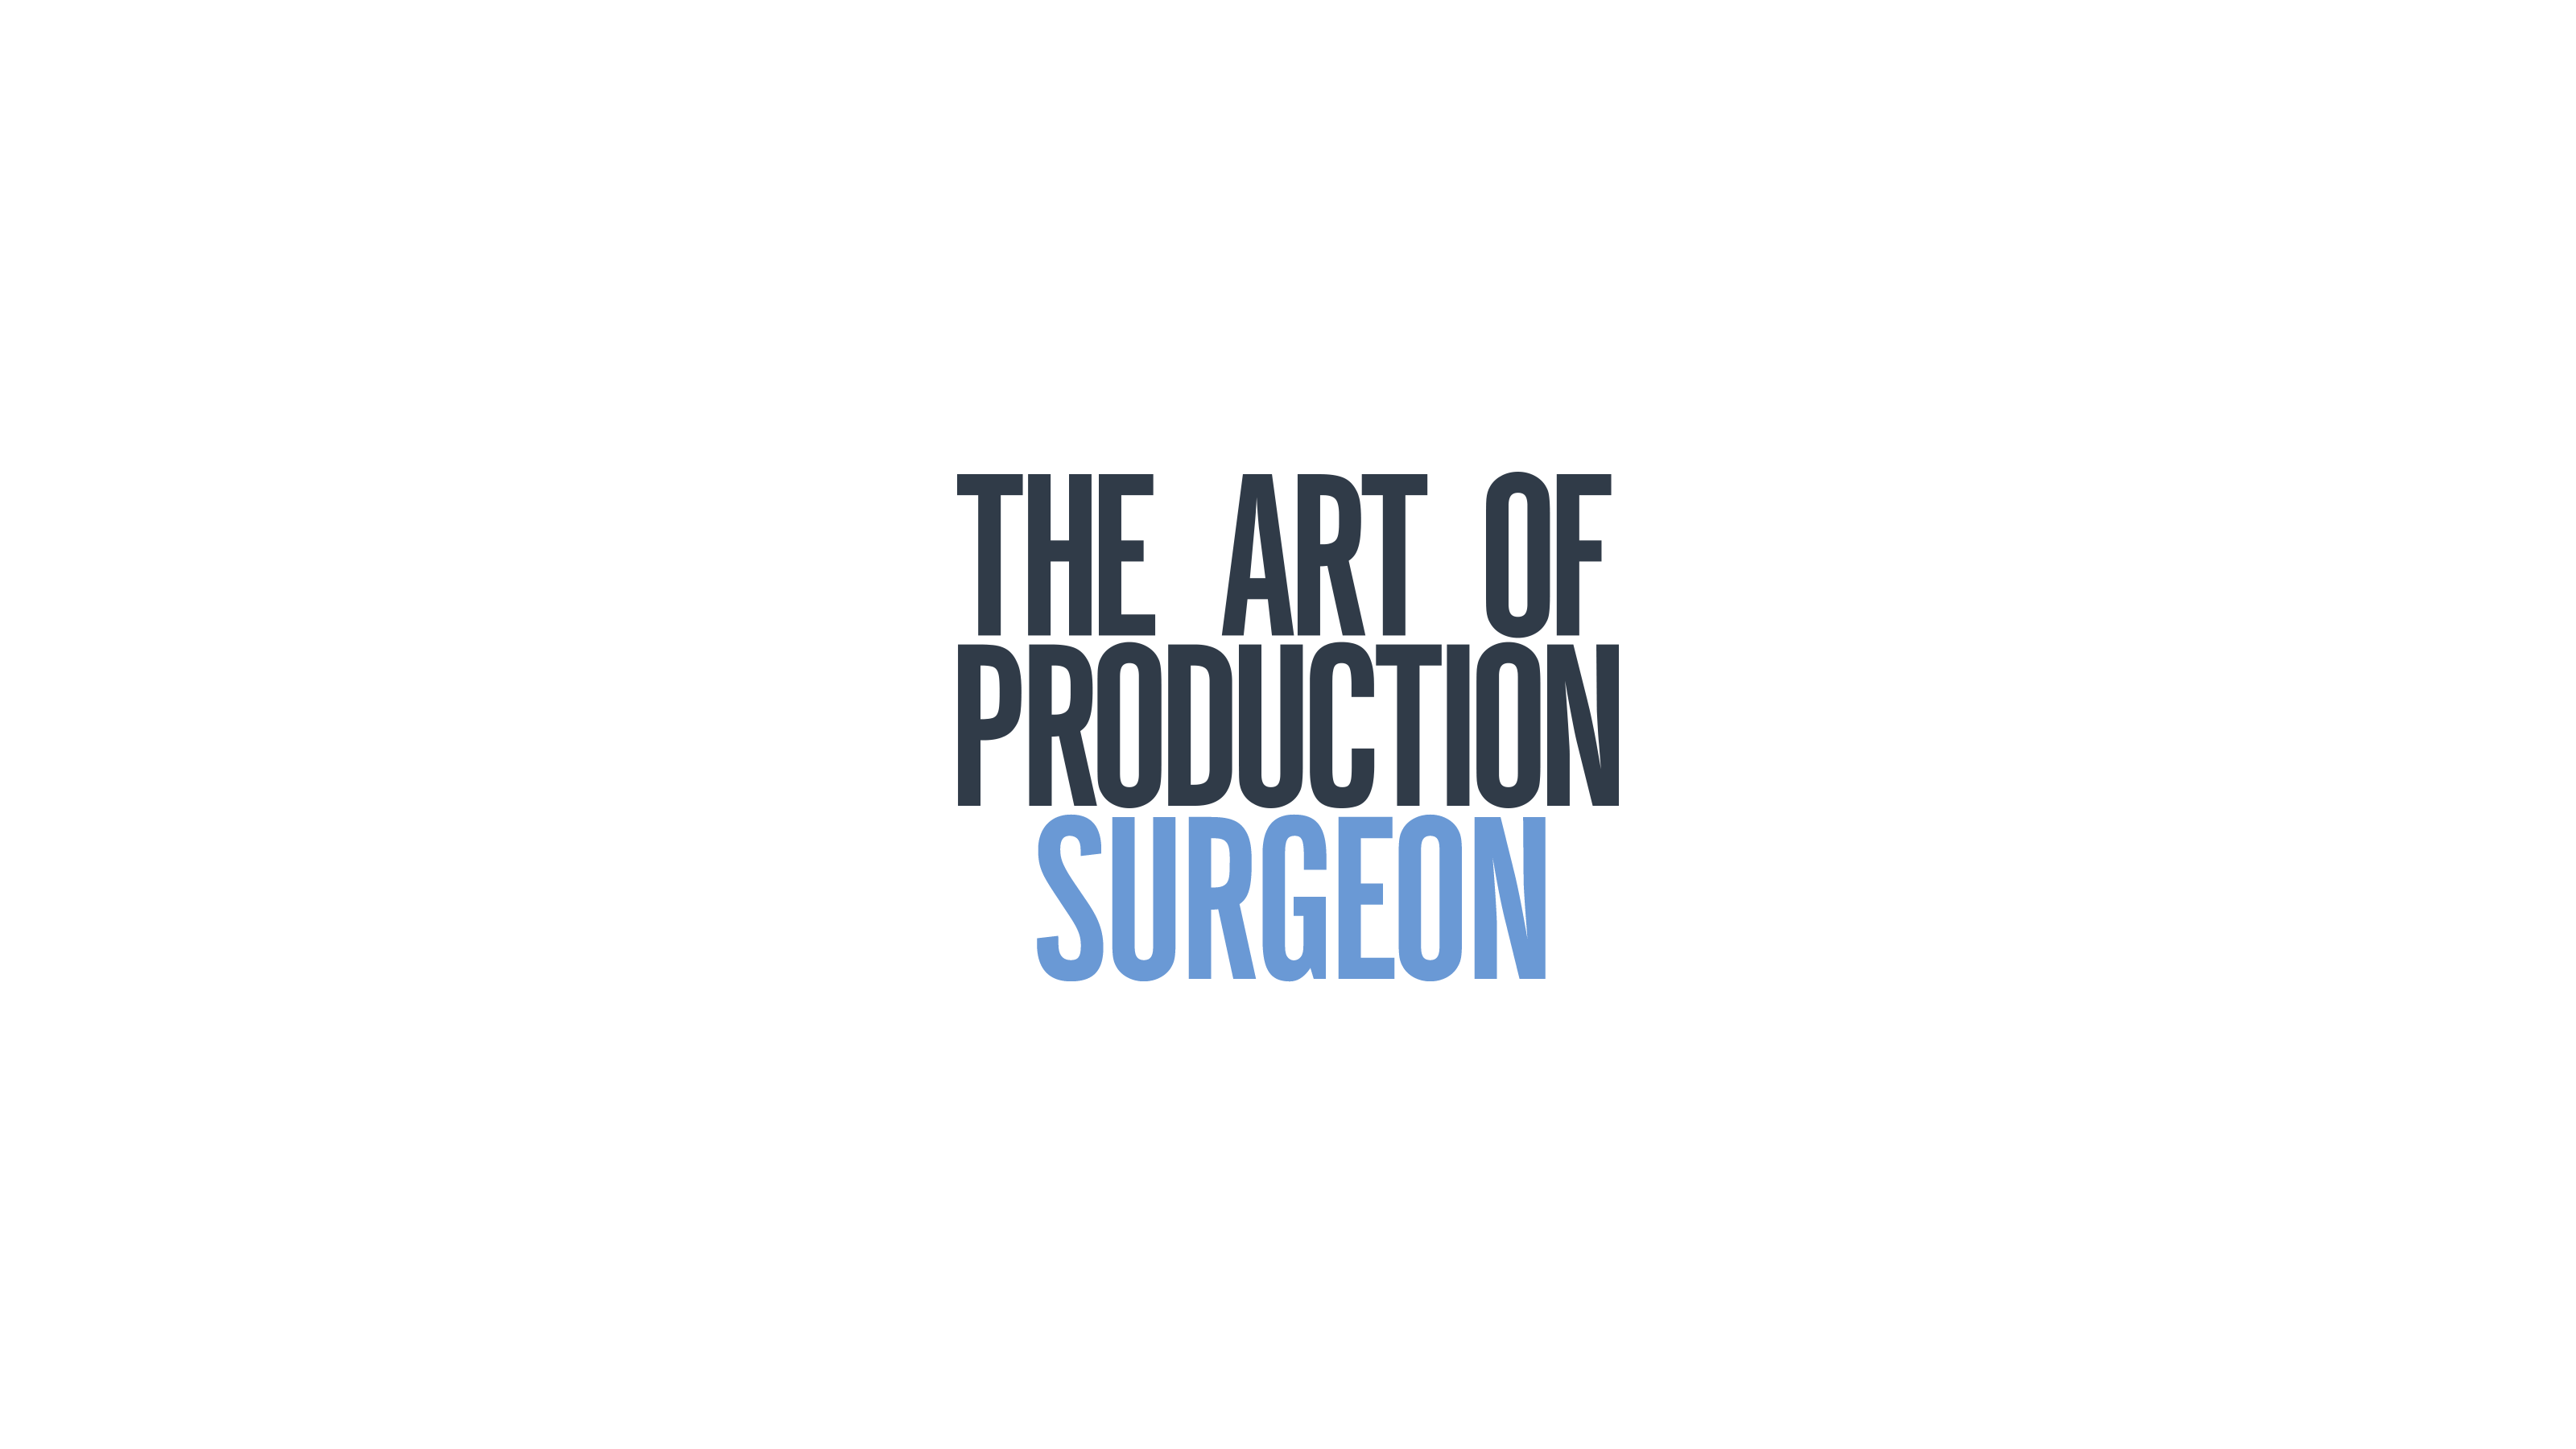 The Art Of Production: Surgeon